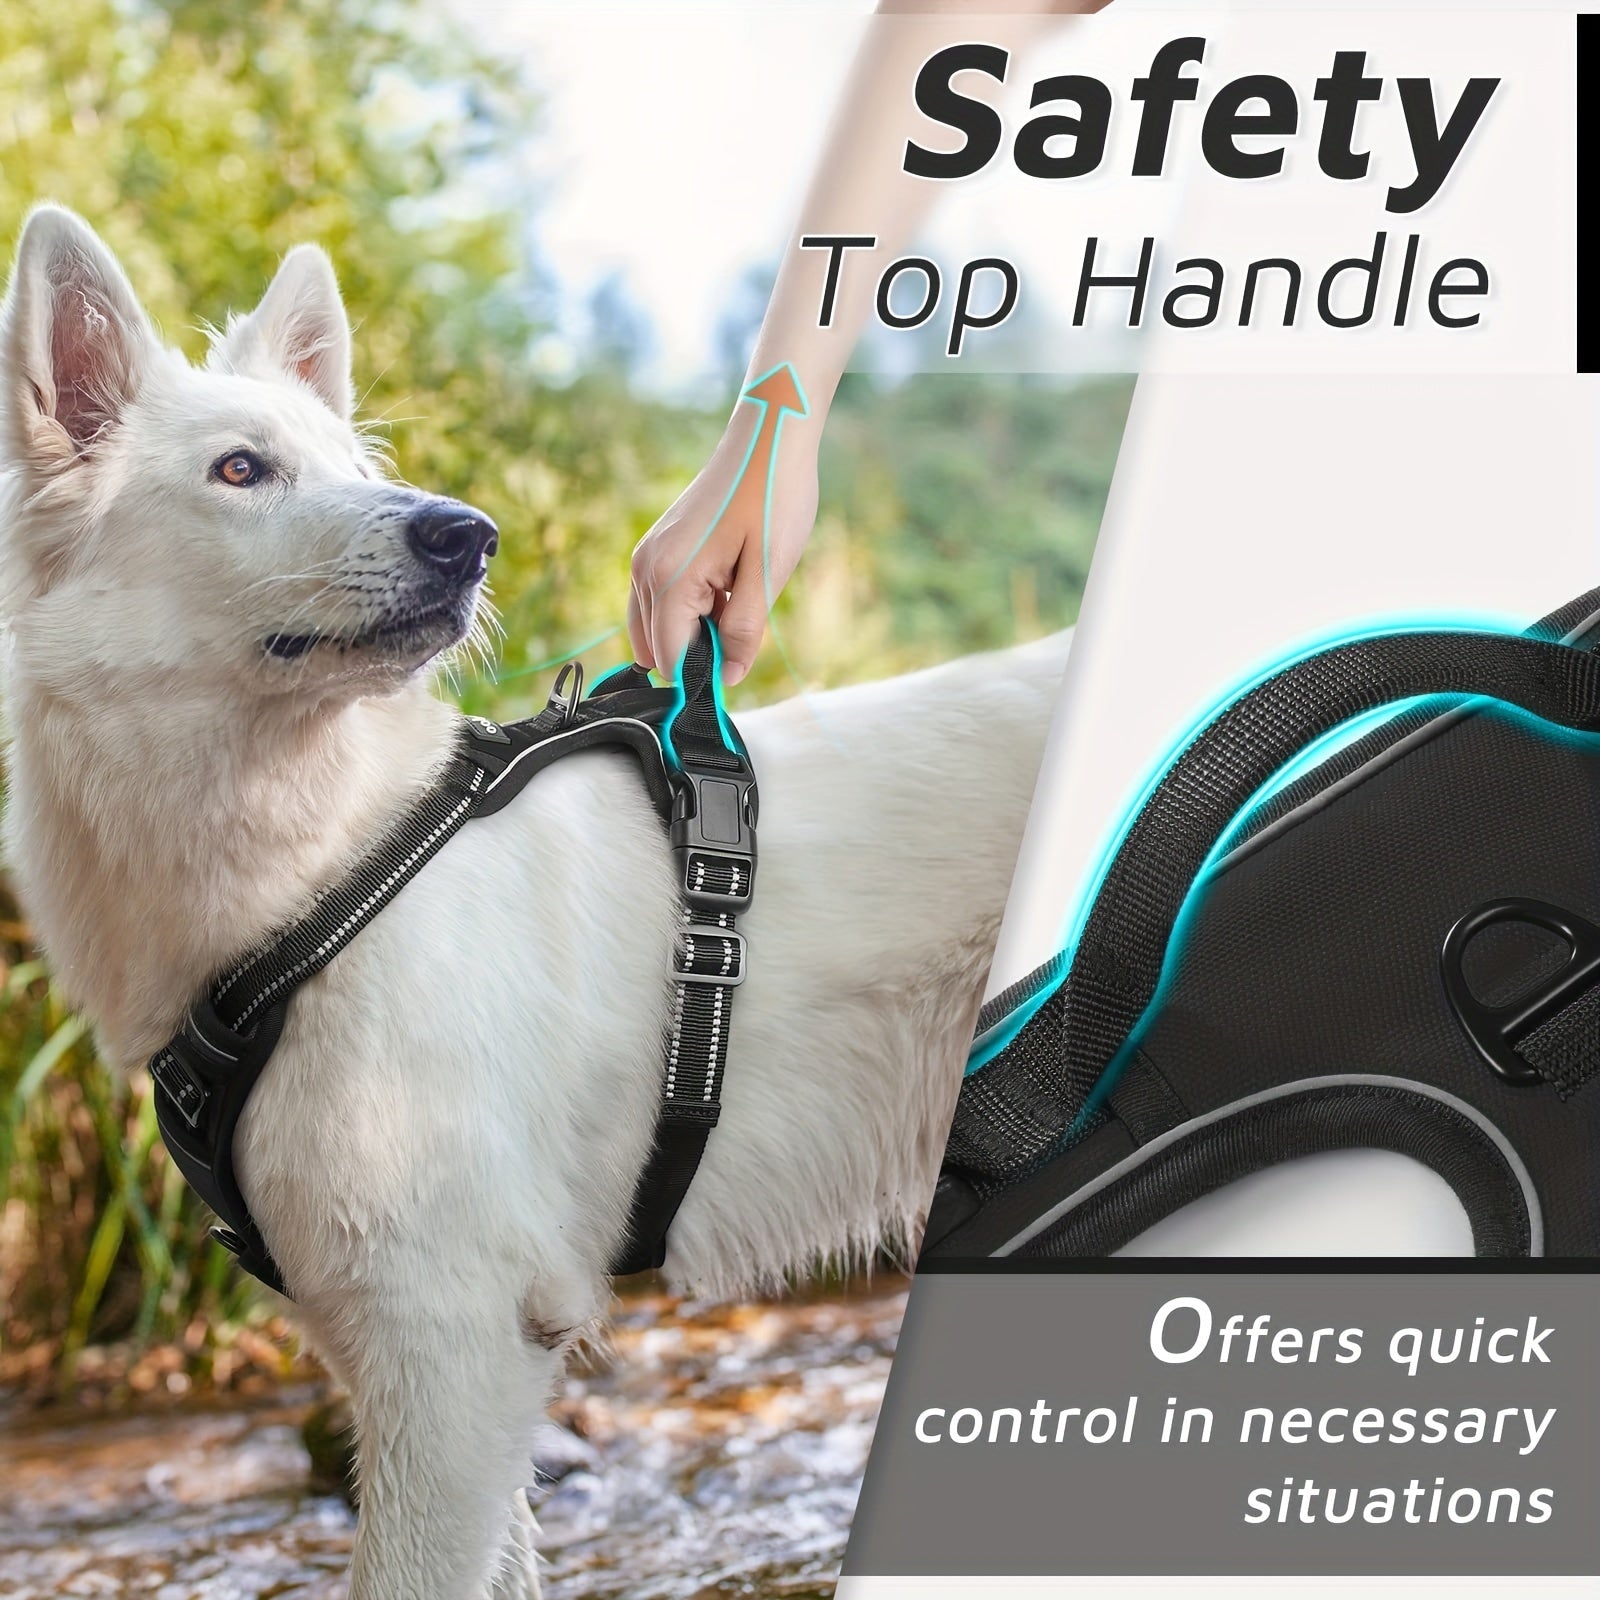 Reflective No-Pull Dog Harness with Easy Control Handle and Adjustable Soft Padding for Small, Medium, and Large Dogs